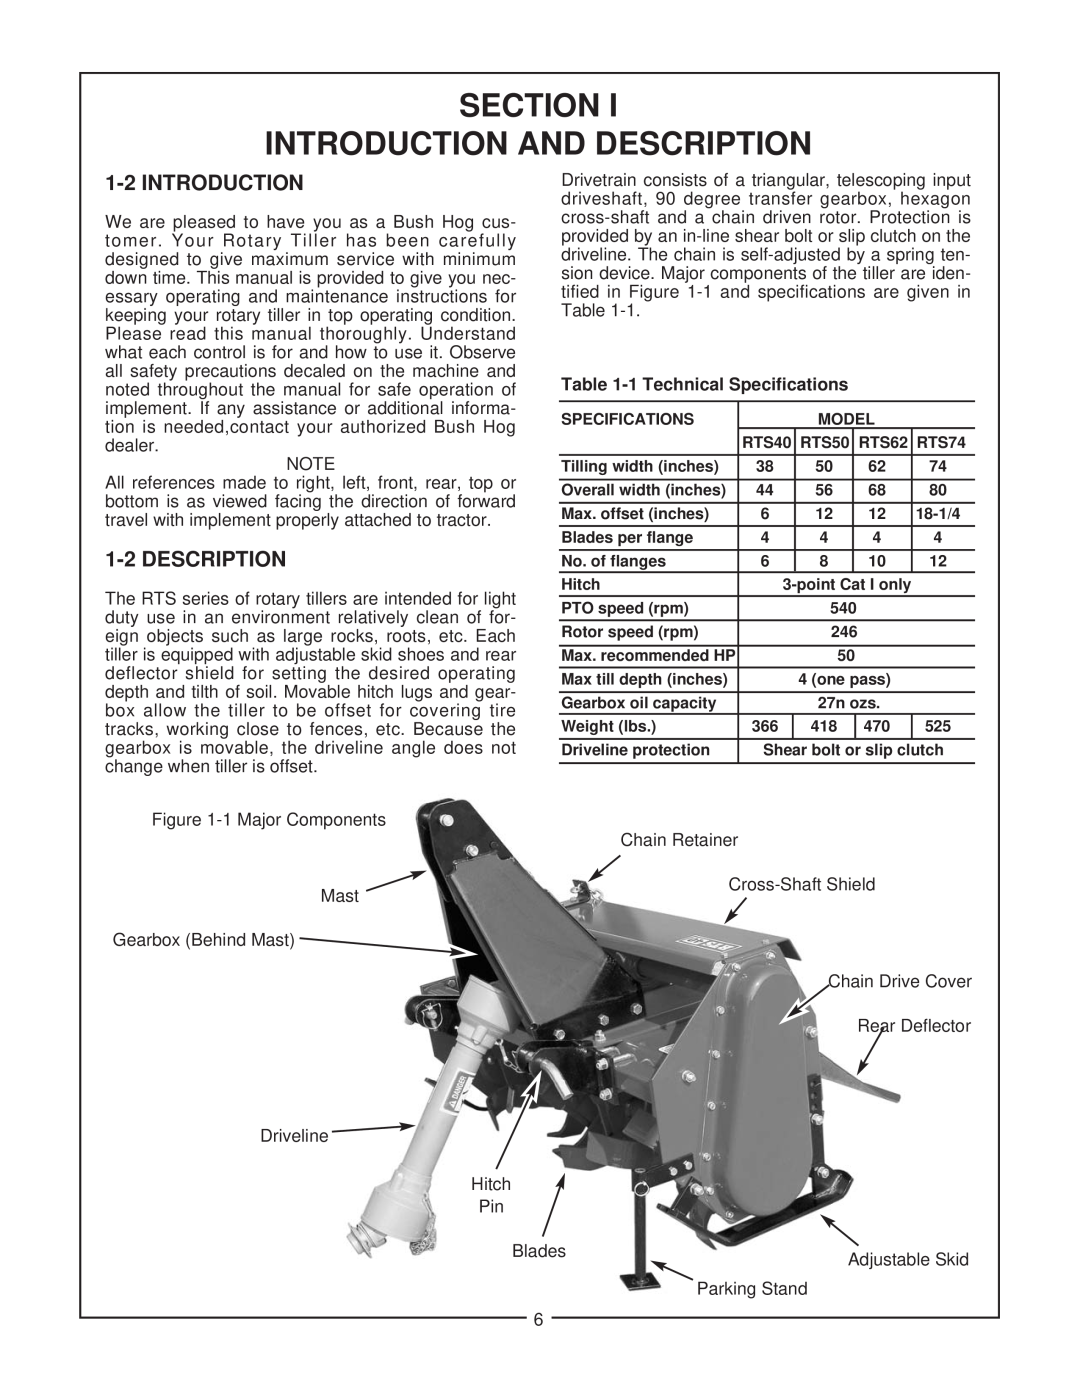 Bush Hog RTS manual Section Introduction And Description, 1-2INTRODUCTION, 1-2DESCRIPTION, 1Technical Specifications 